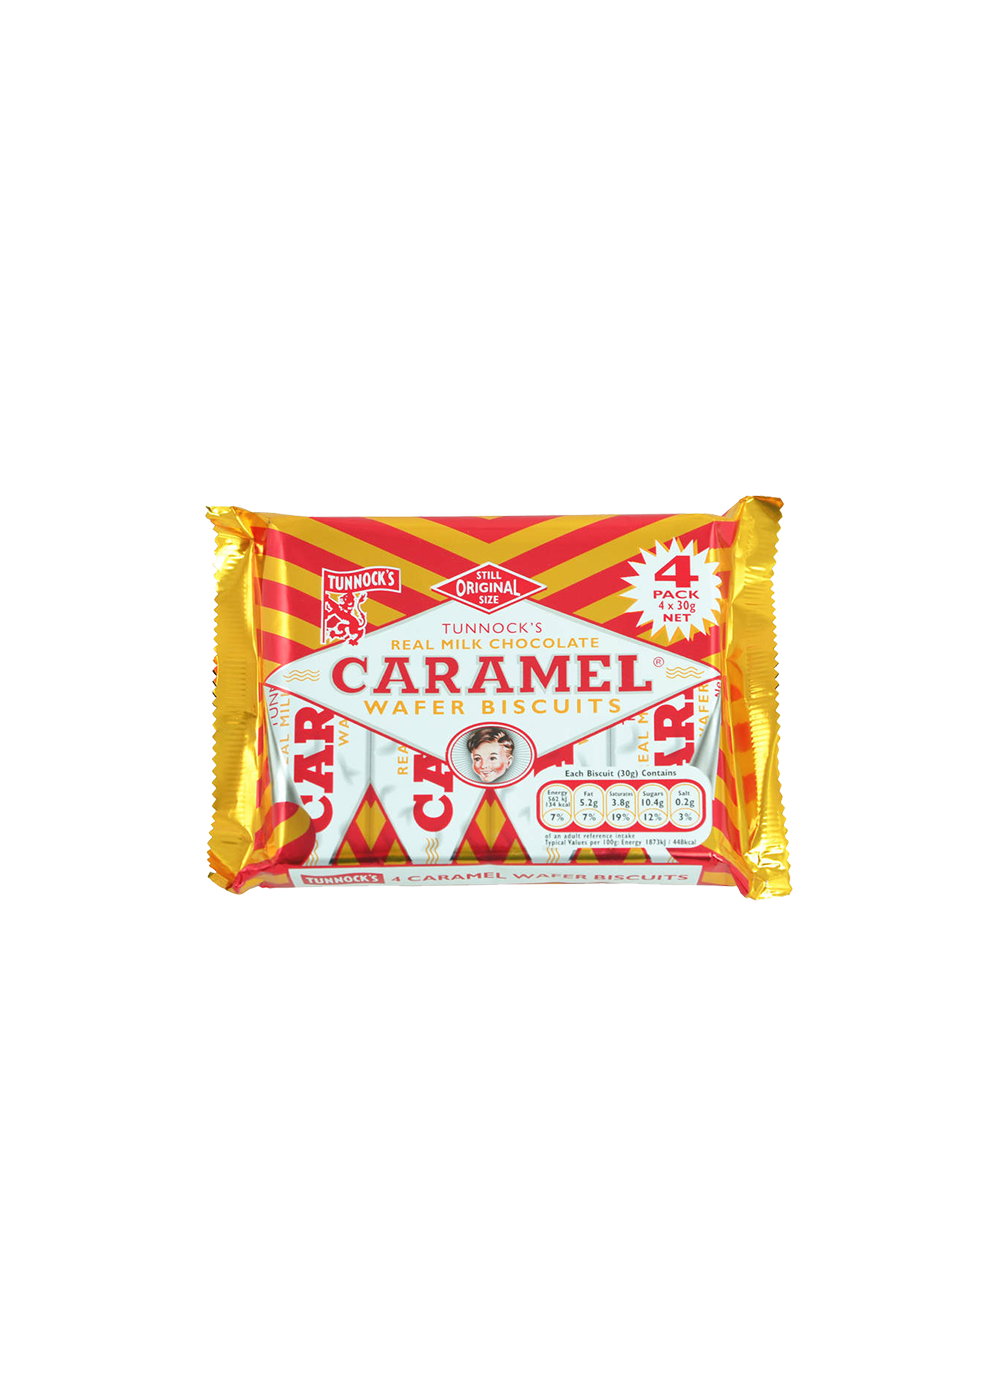 Tunnock's Milk chocolate Caramel Wafer Biscuits 4 Pack